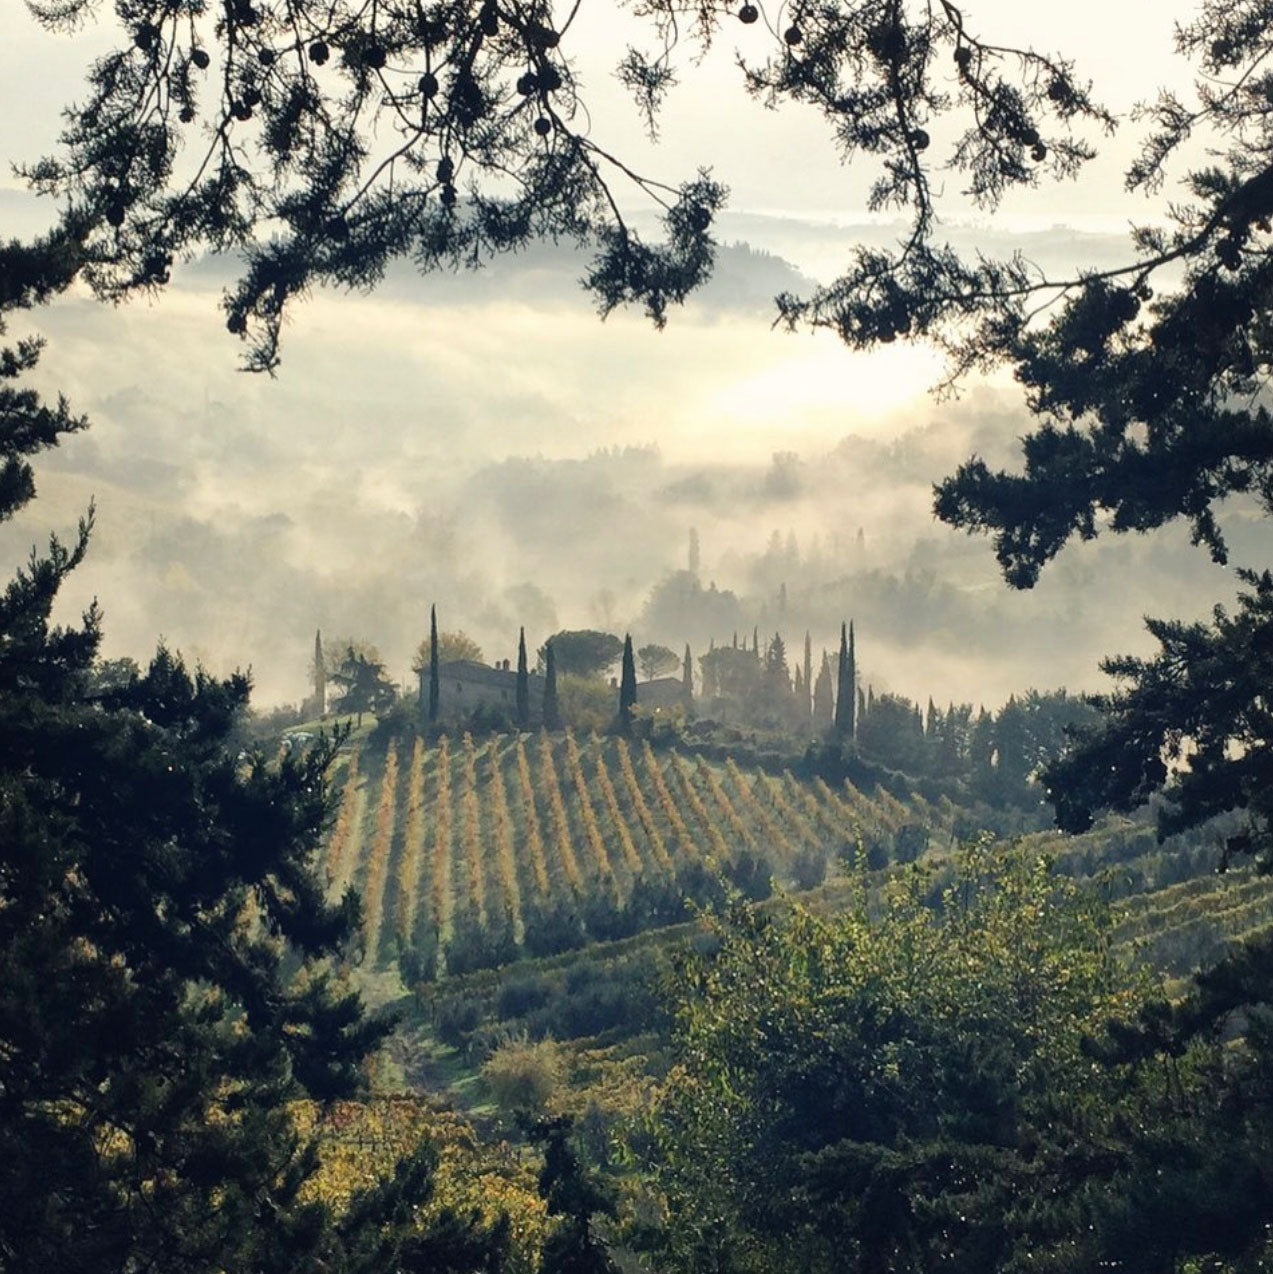 View of San Gimignano landscape of wine vineyards and pine trees. Inspired by Nature.